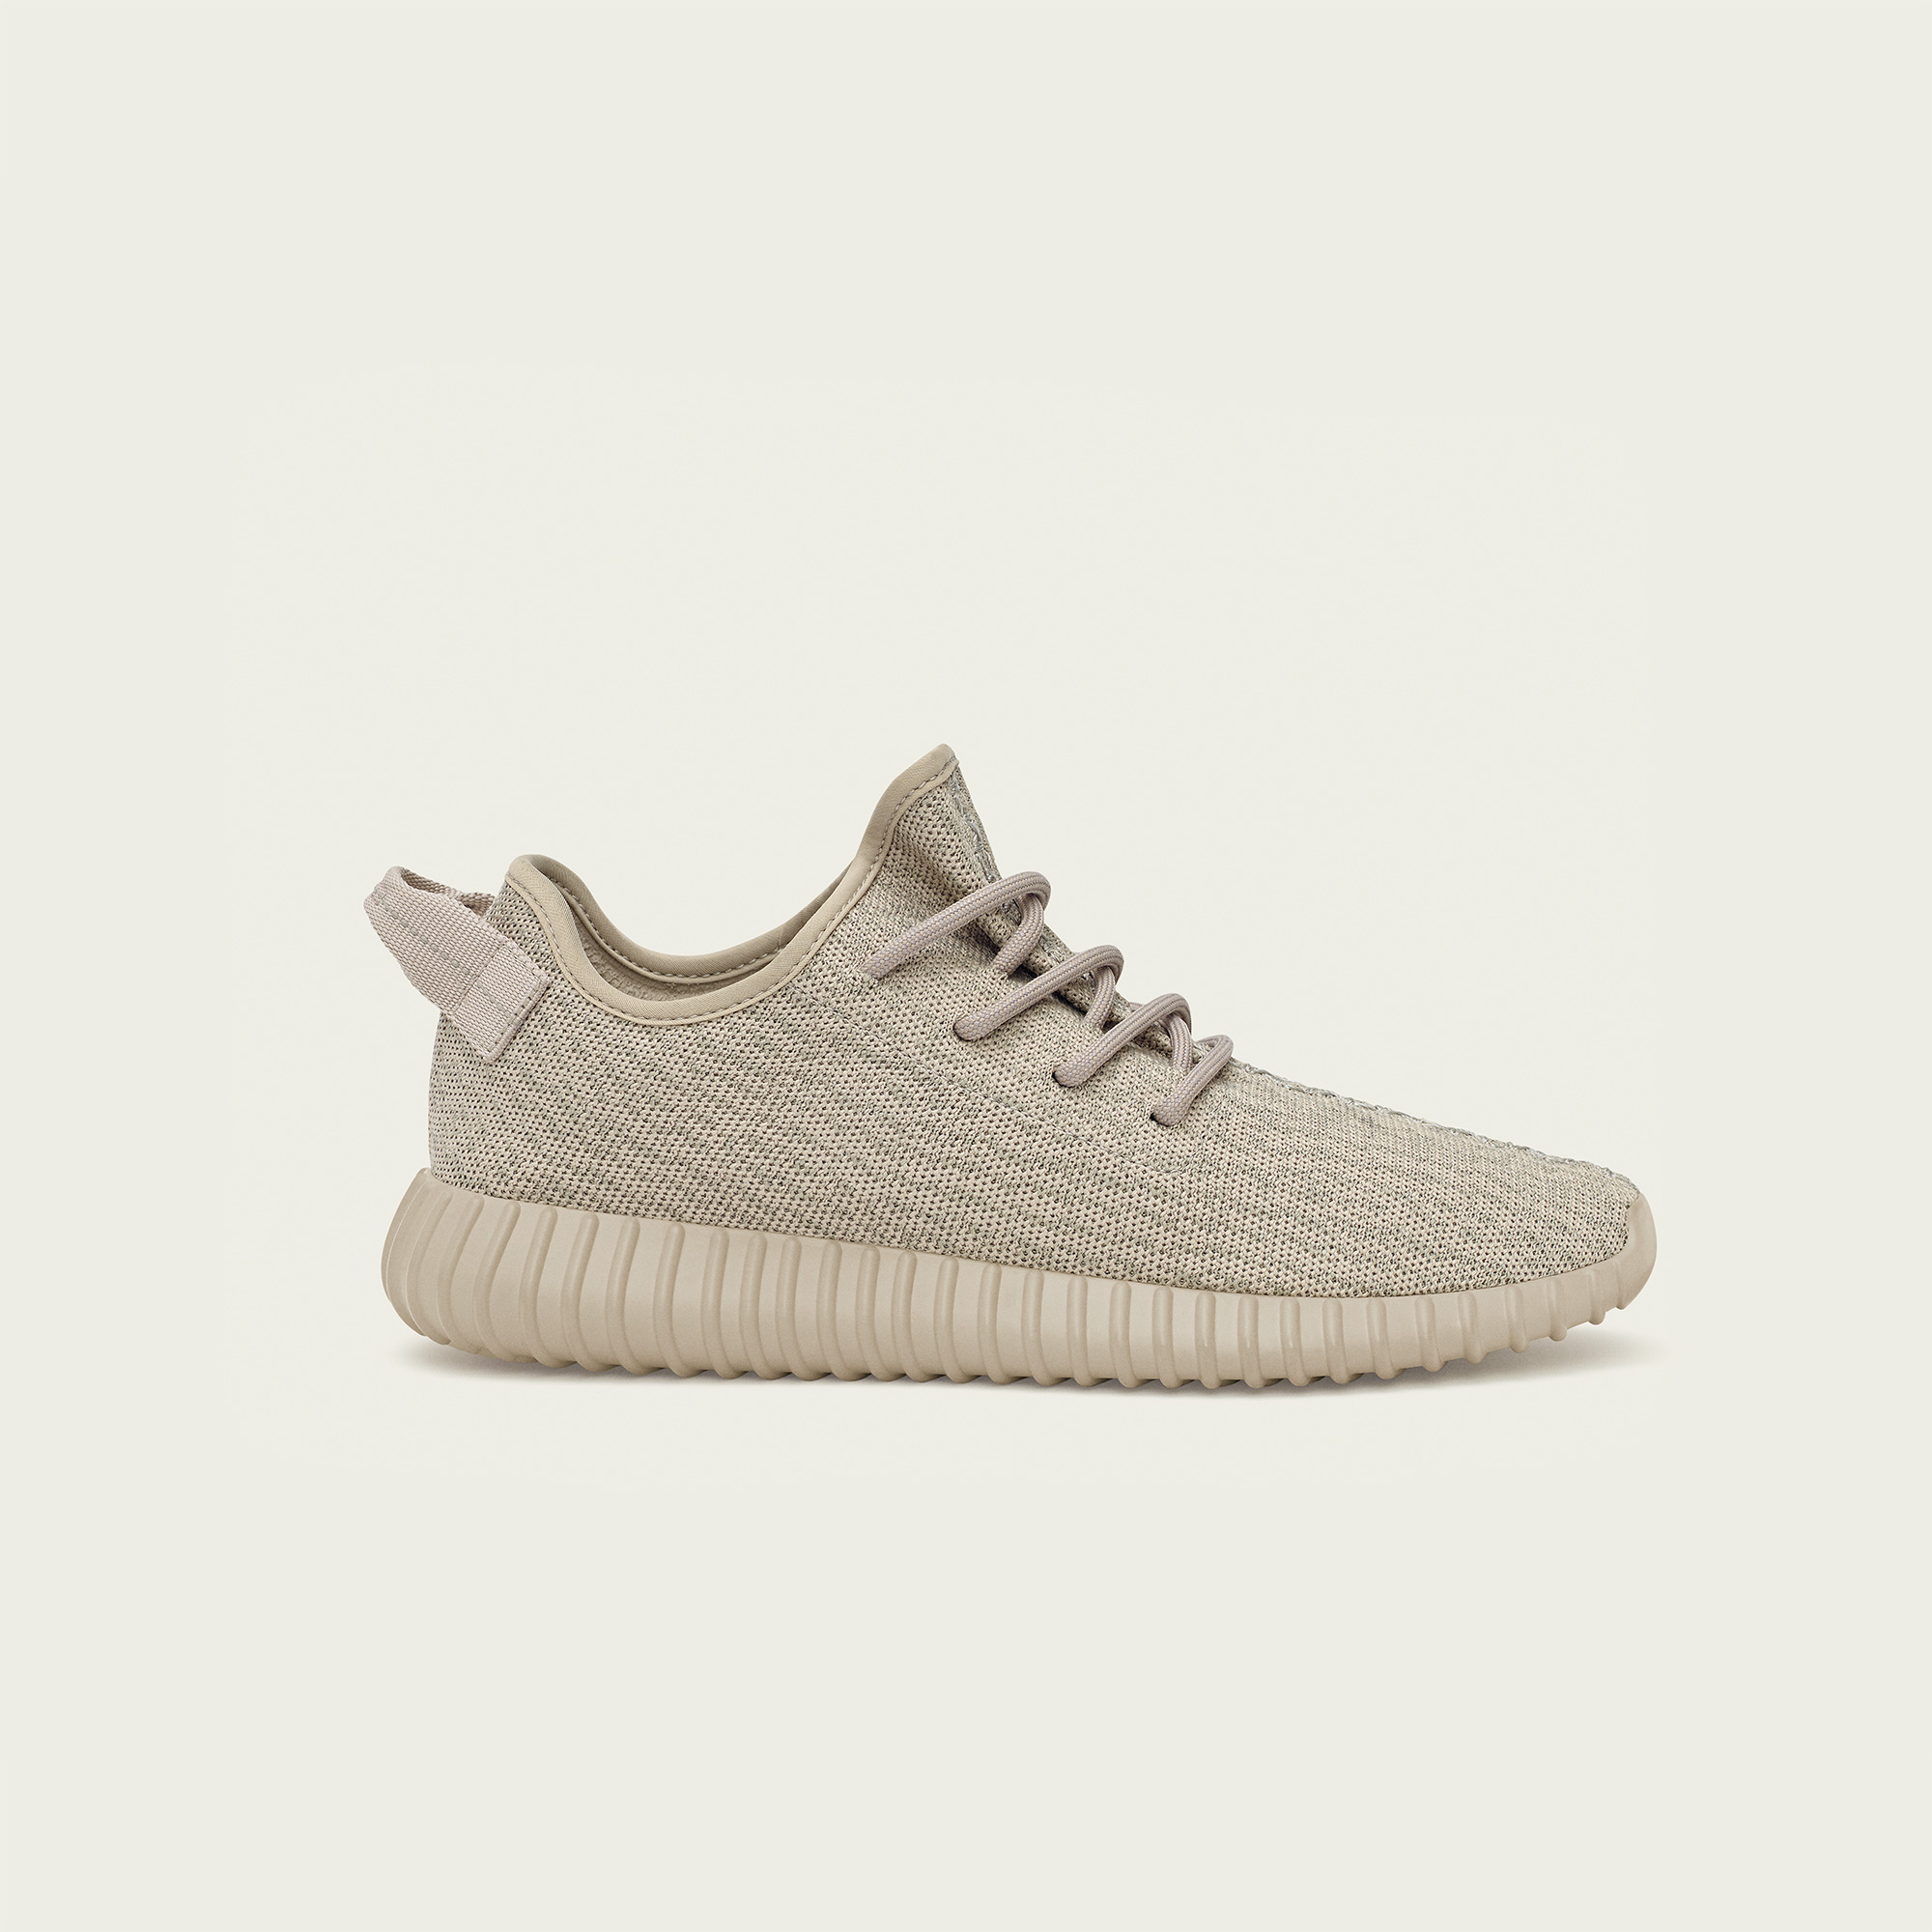 yeezy sand color